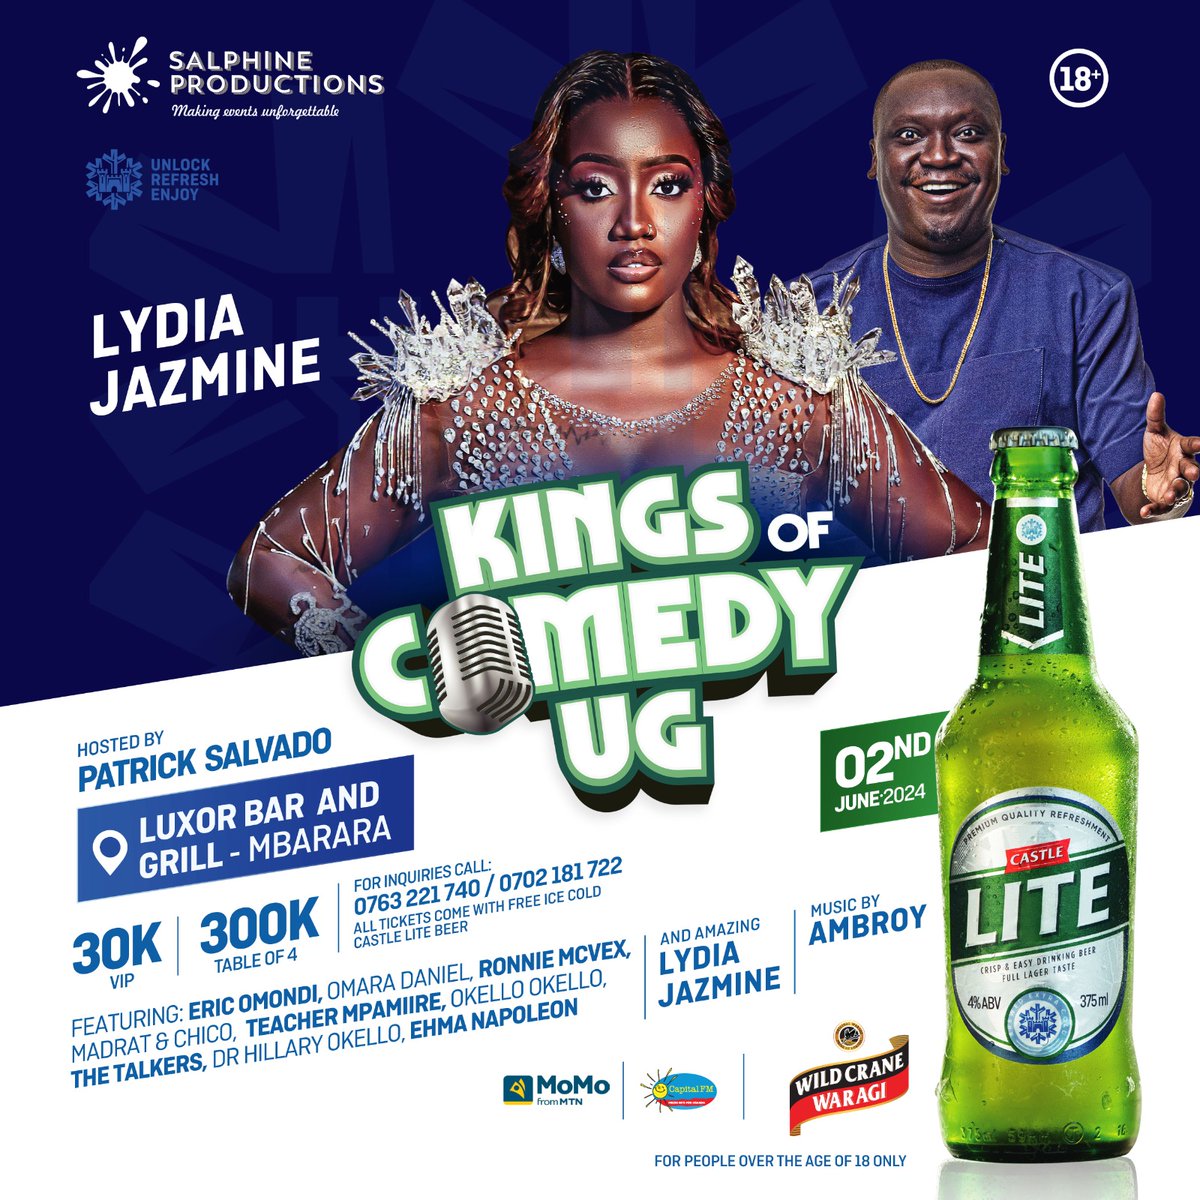 The #KingsOfComedyUg gets closer and closer 2nd June, don't miss performances from Lydia Jazmine and Ambroy. These come in when laughter is almost killing you to rescue you